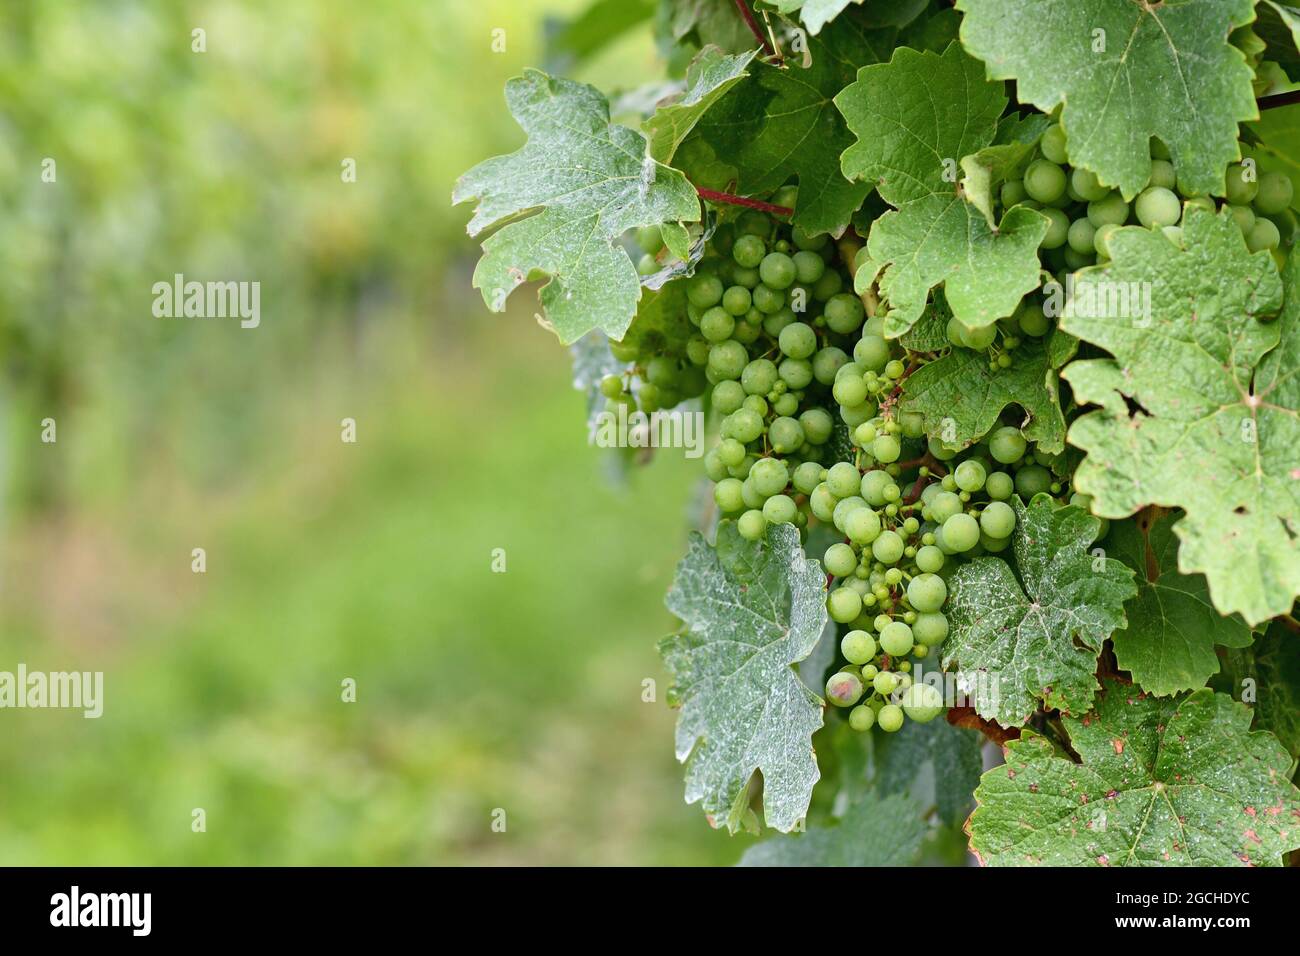 Small green wine grapes in vineyard with mildew on leaves Stock Photo